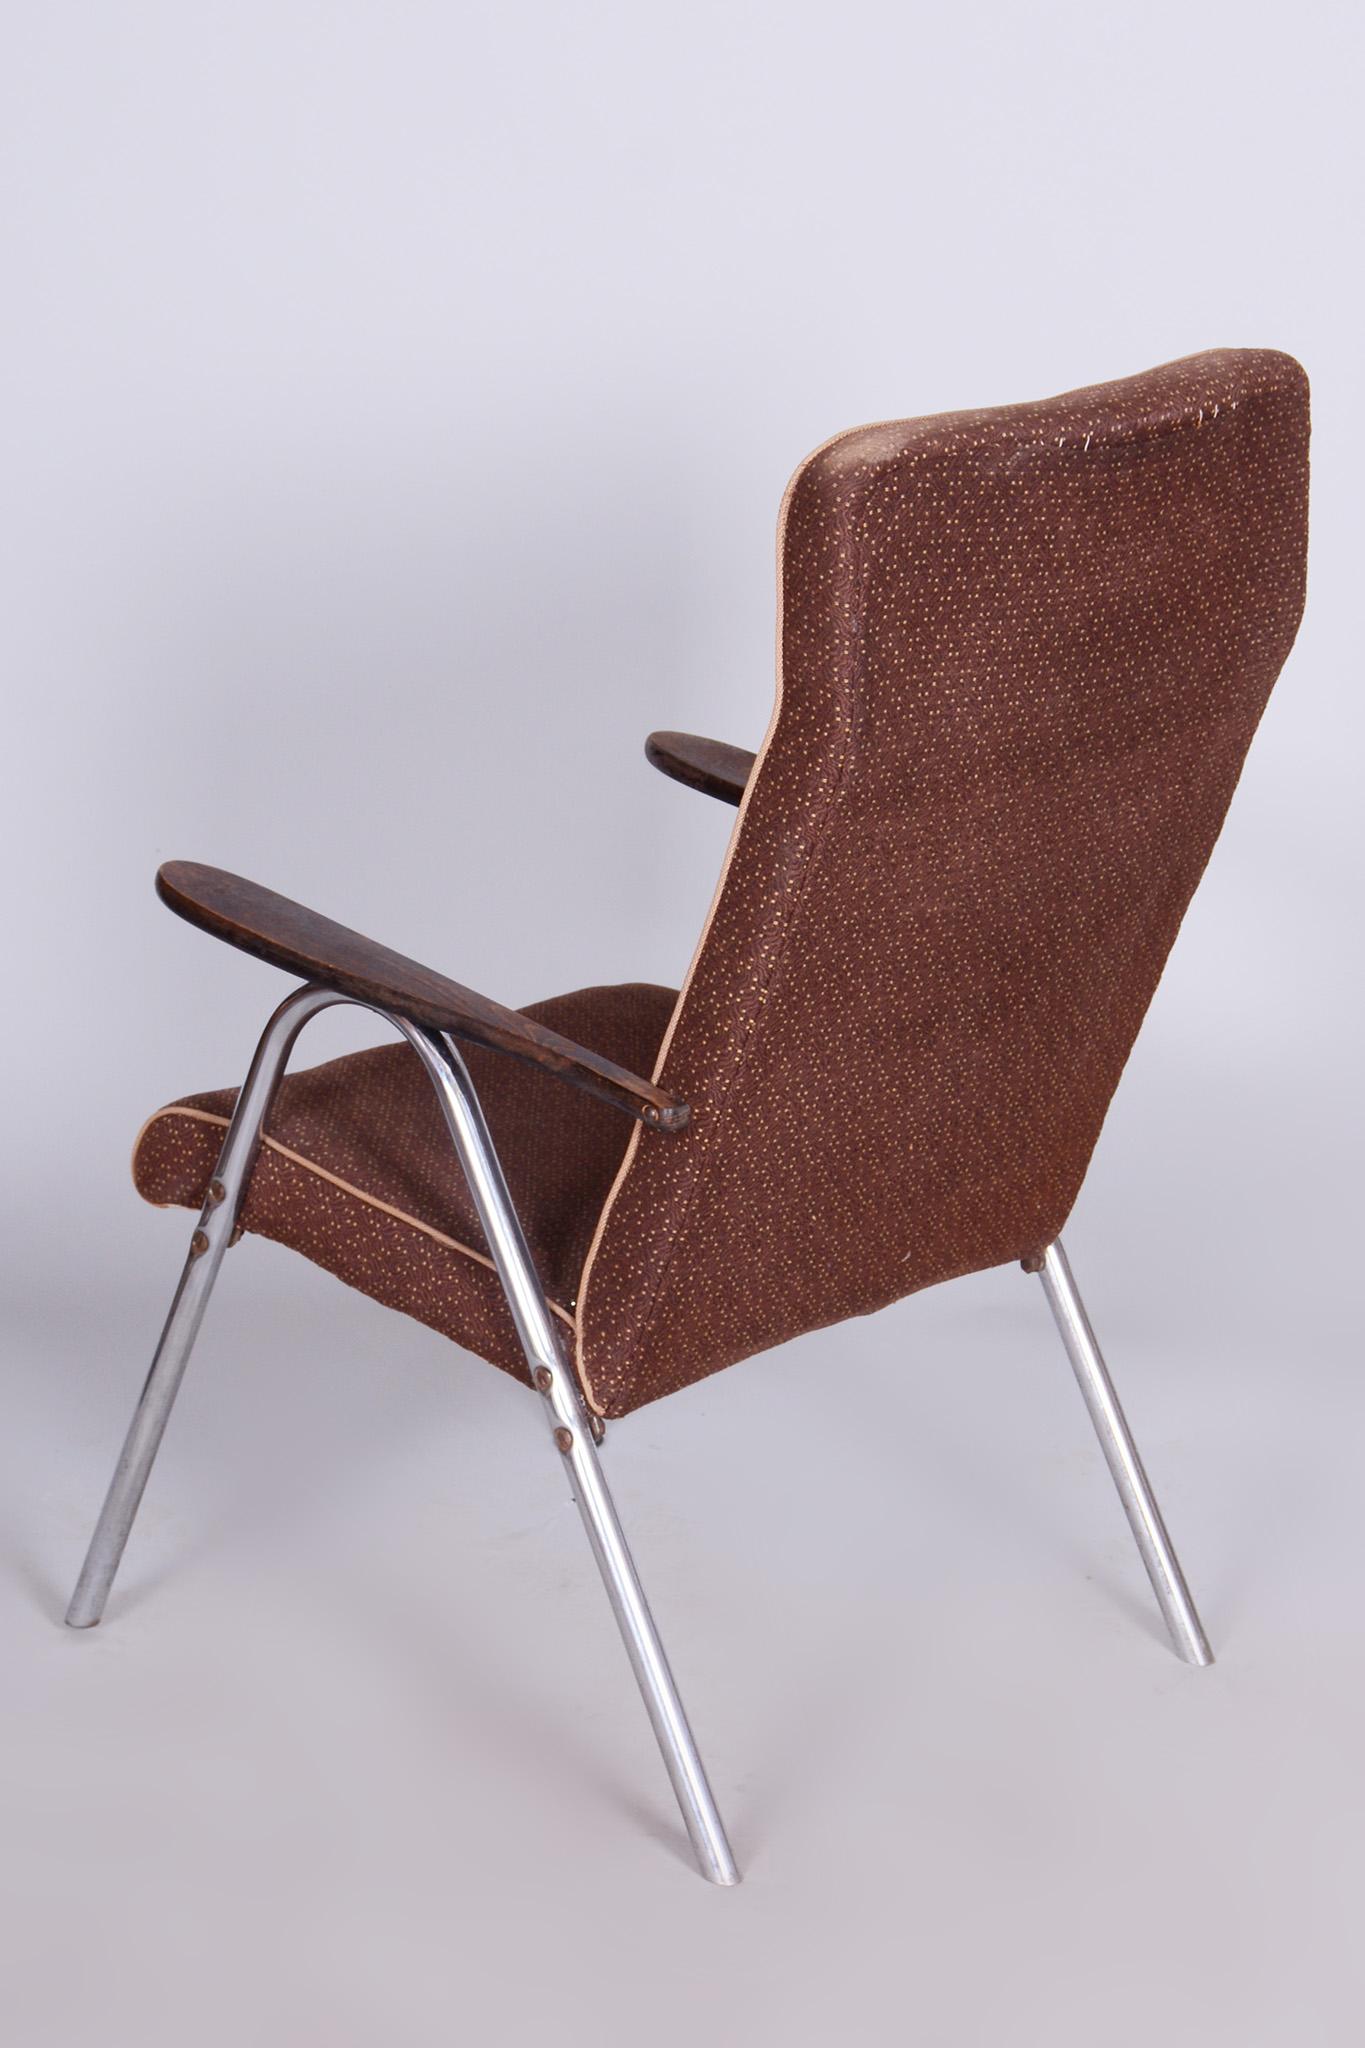 Original Bauhaus Armchair. Very Well Preserved Condition.

Source: Czechia (Czehoslovakia)
Period: 1940-1949
Material: Upholstery, Chrome-Plated Steel
Professionally cleaned upholstery and chrome parts.

This item features classic Bauhaus